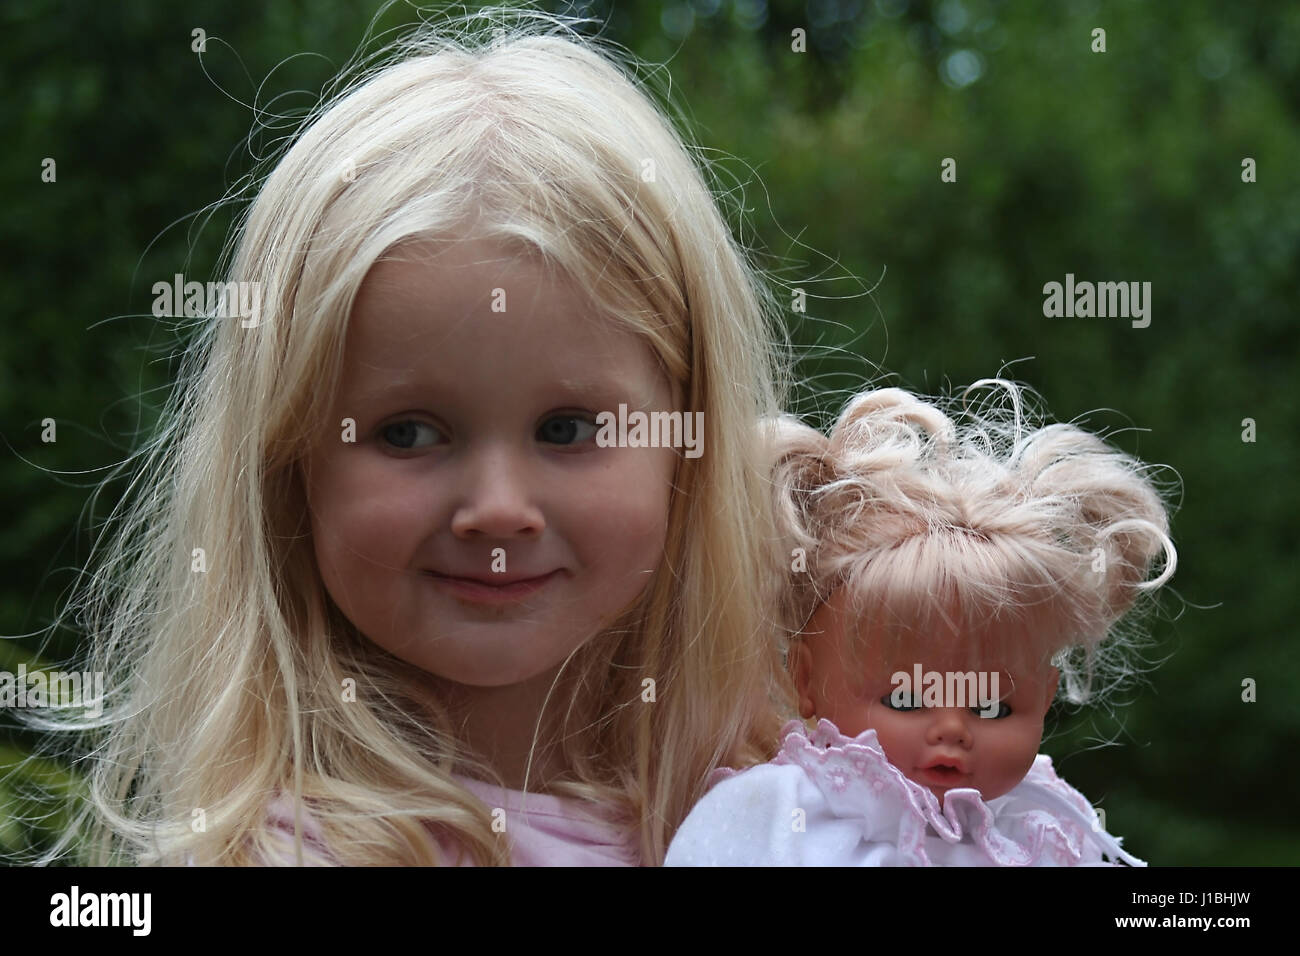 Little blonde girl, child playing with her doll in the garden blurred background, love concept, children toys, joy fun playtime, little girl doll Stock Photo